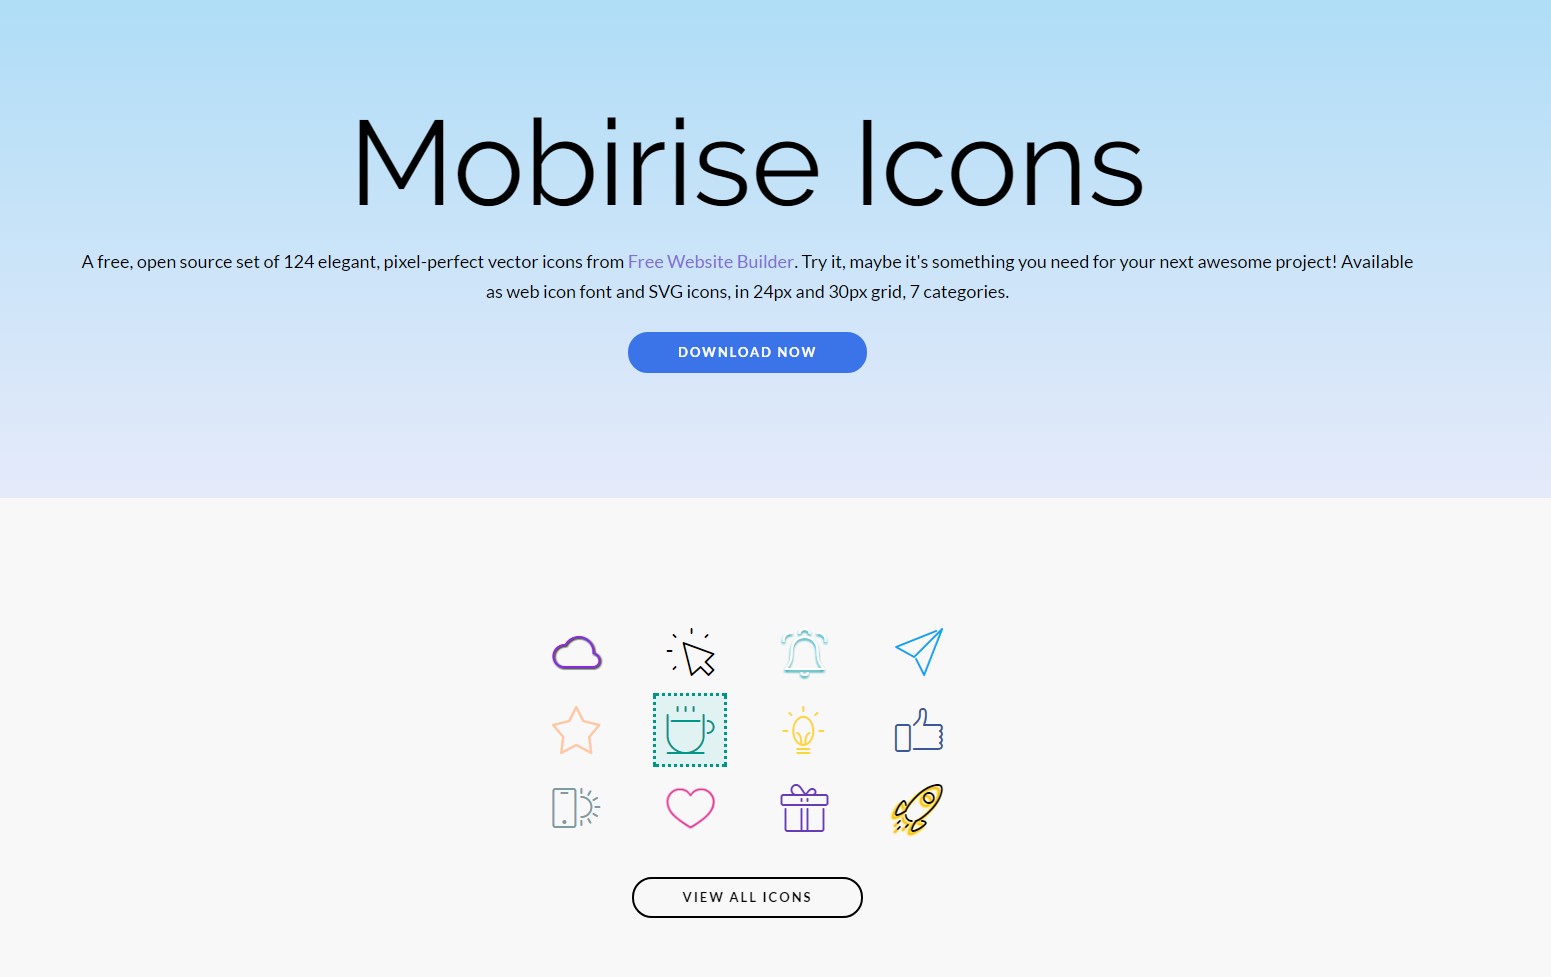 mobirise icons group